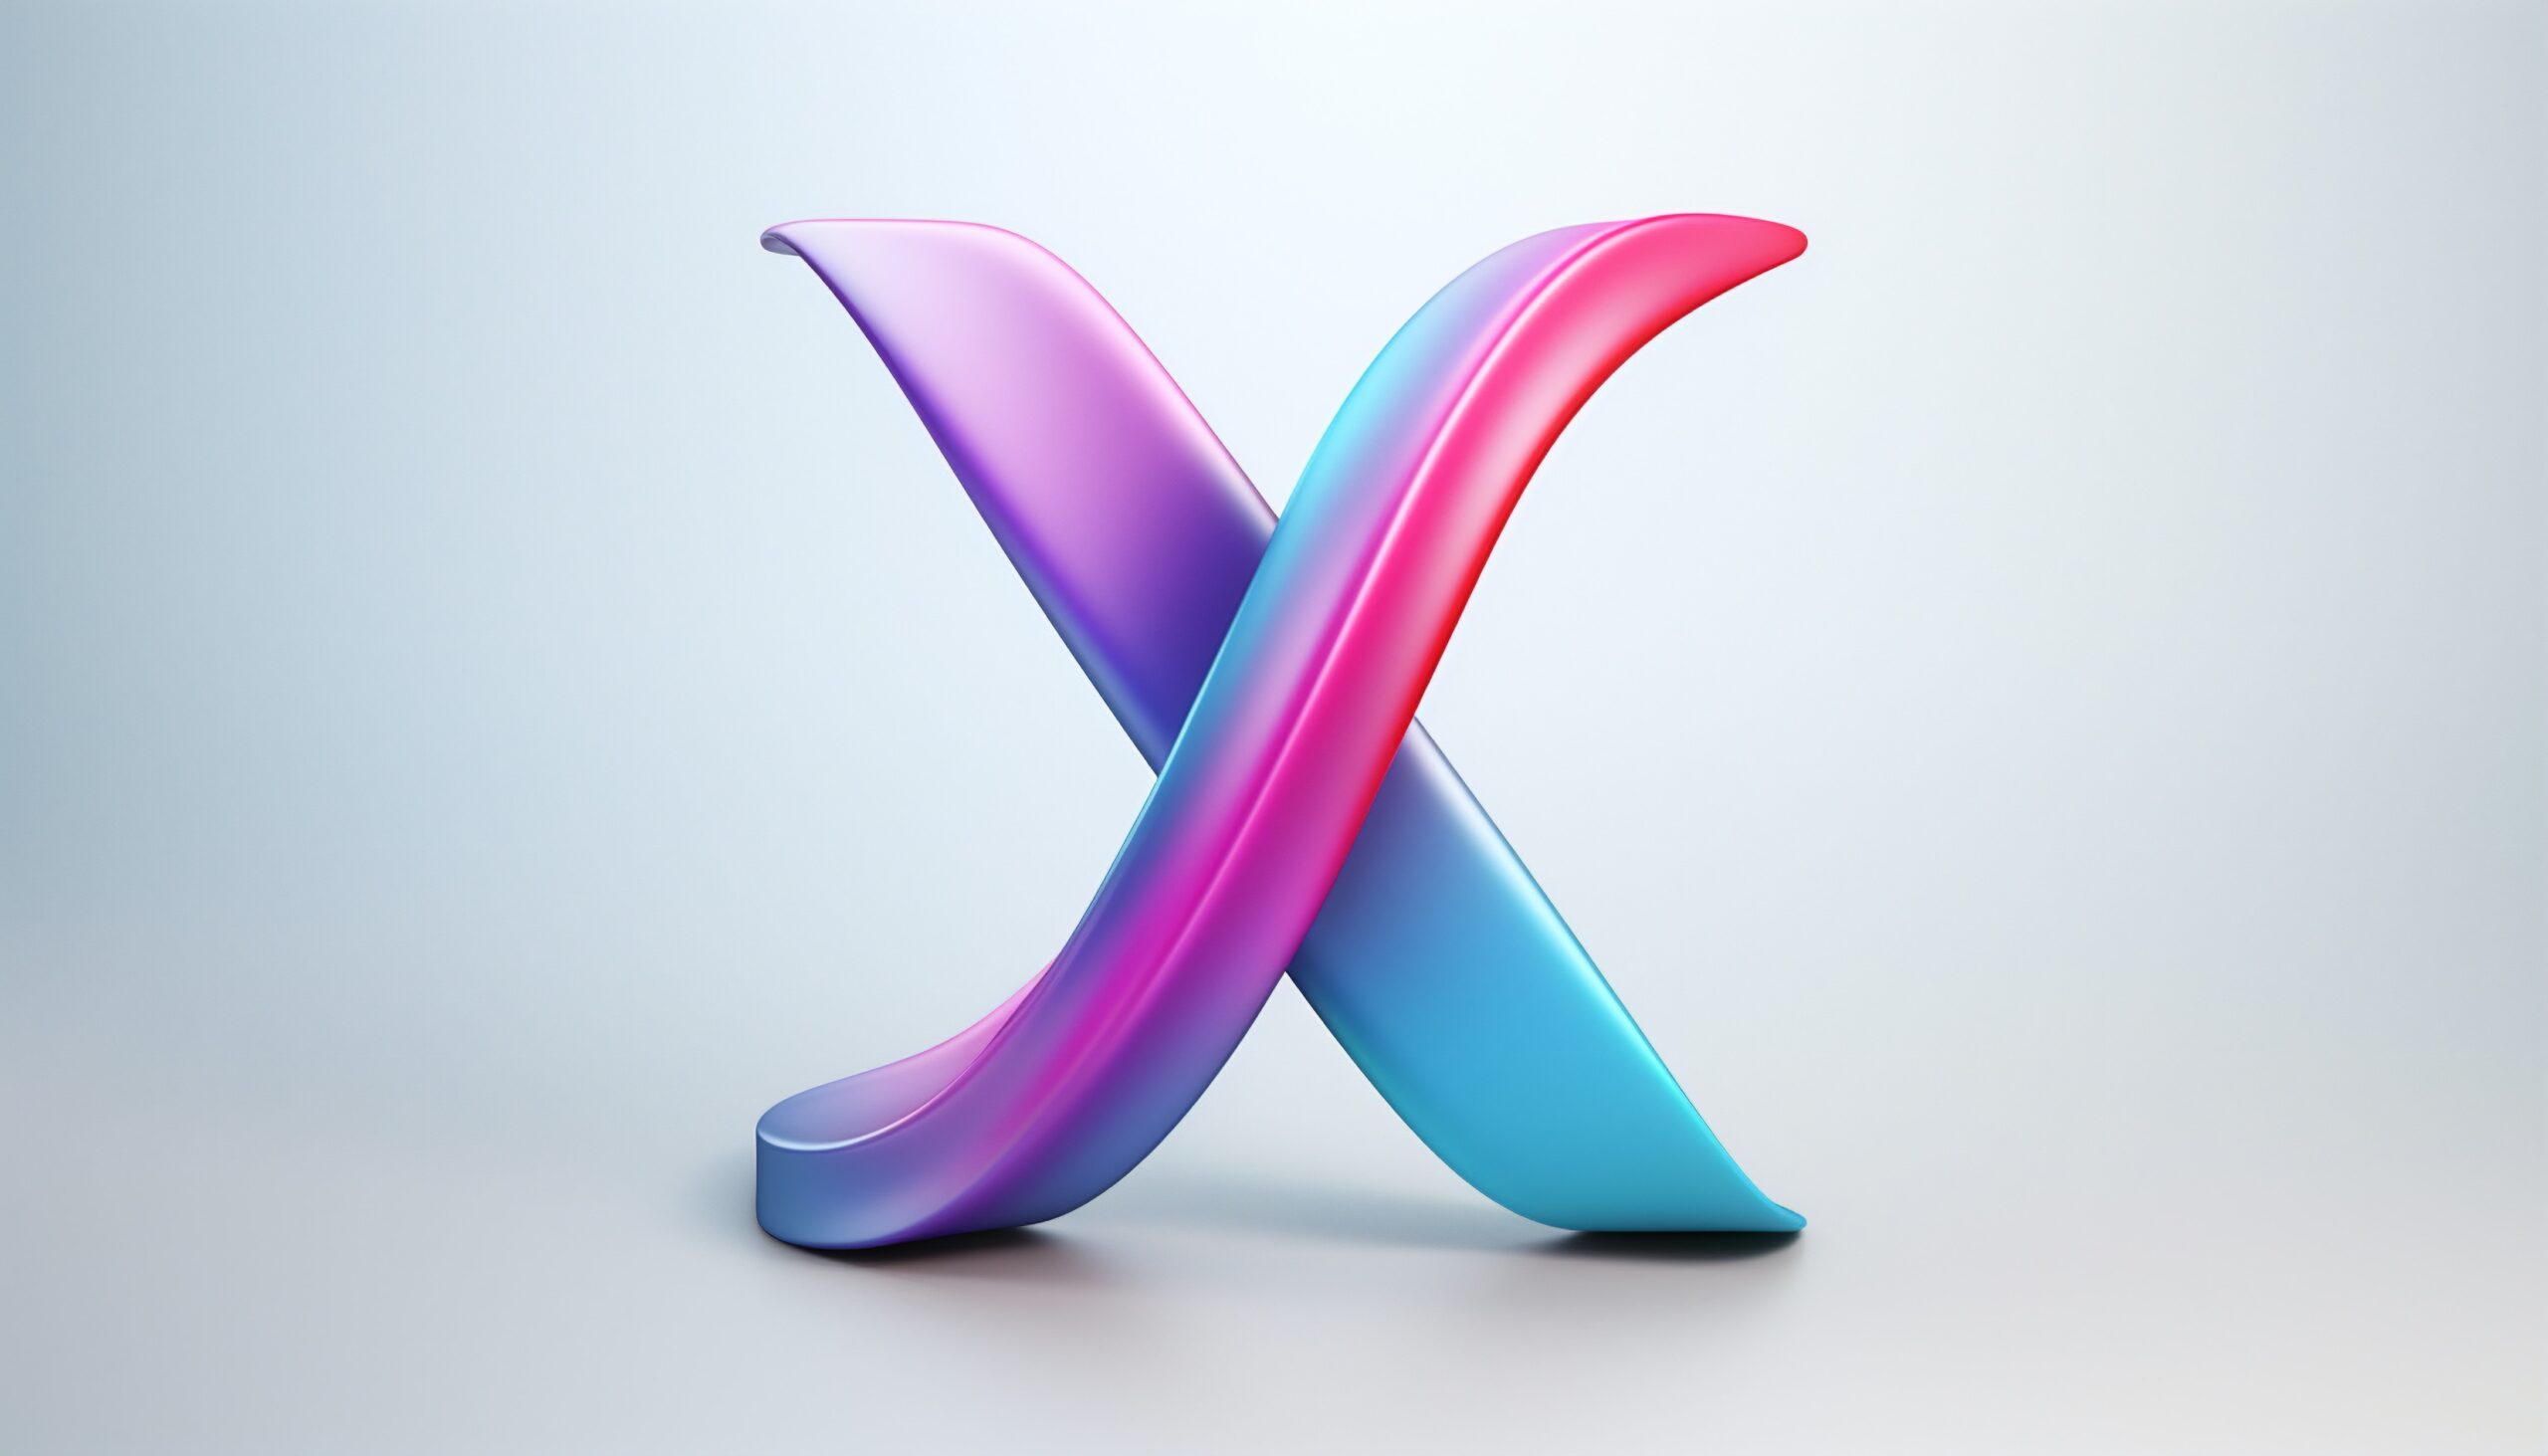 the letter x is made up of colored liquid